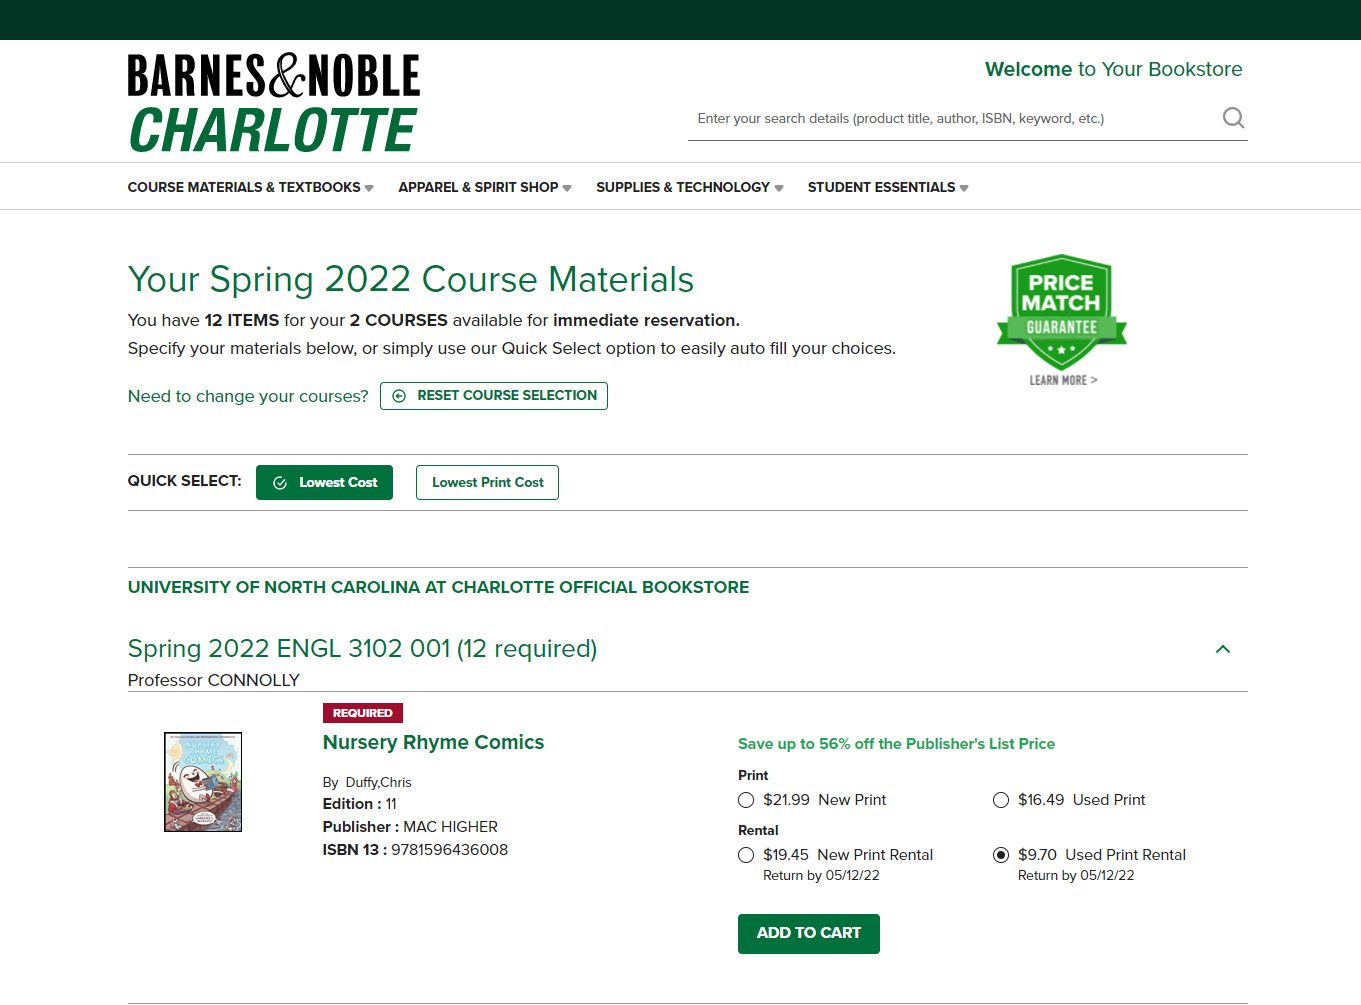 Barnes and Noble Charlotte course materials page